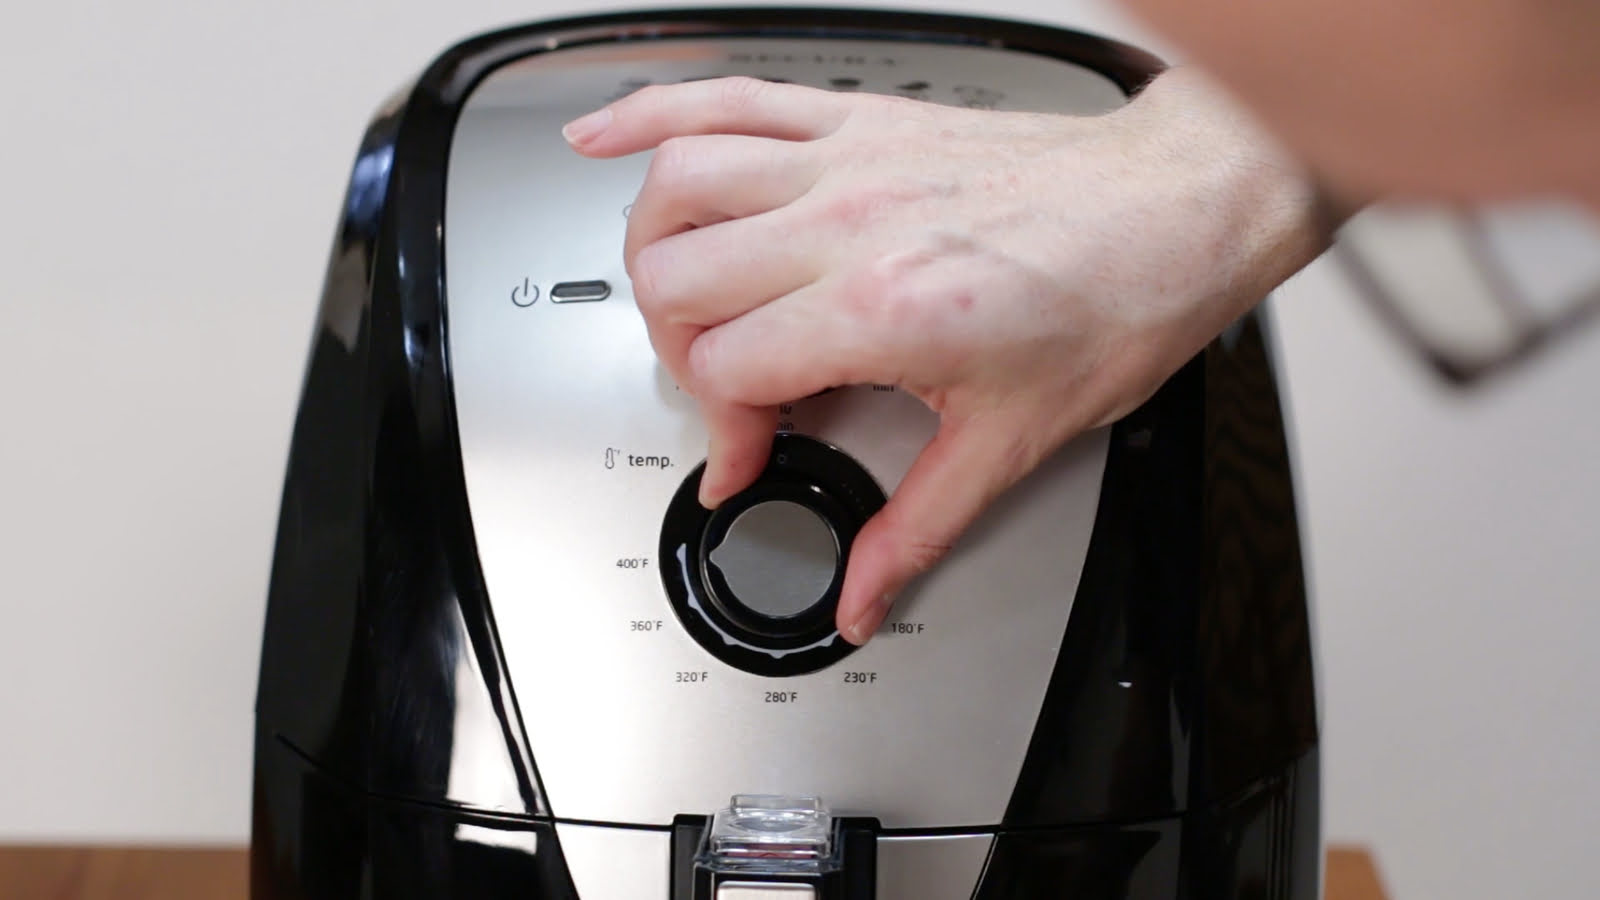 How To Turn On Air Fryer